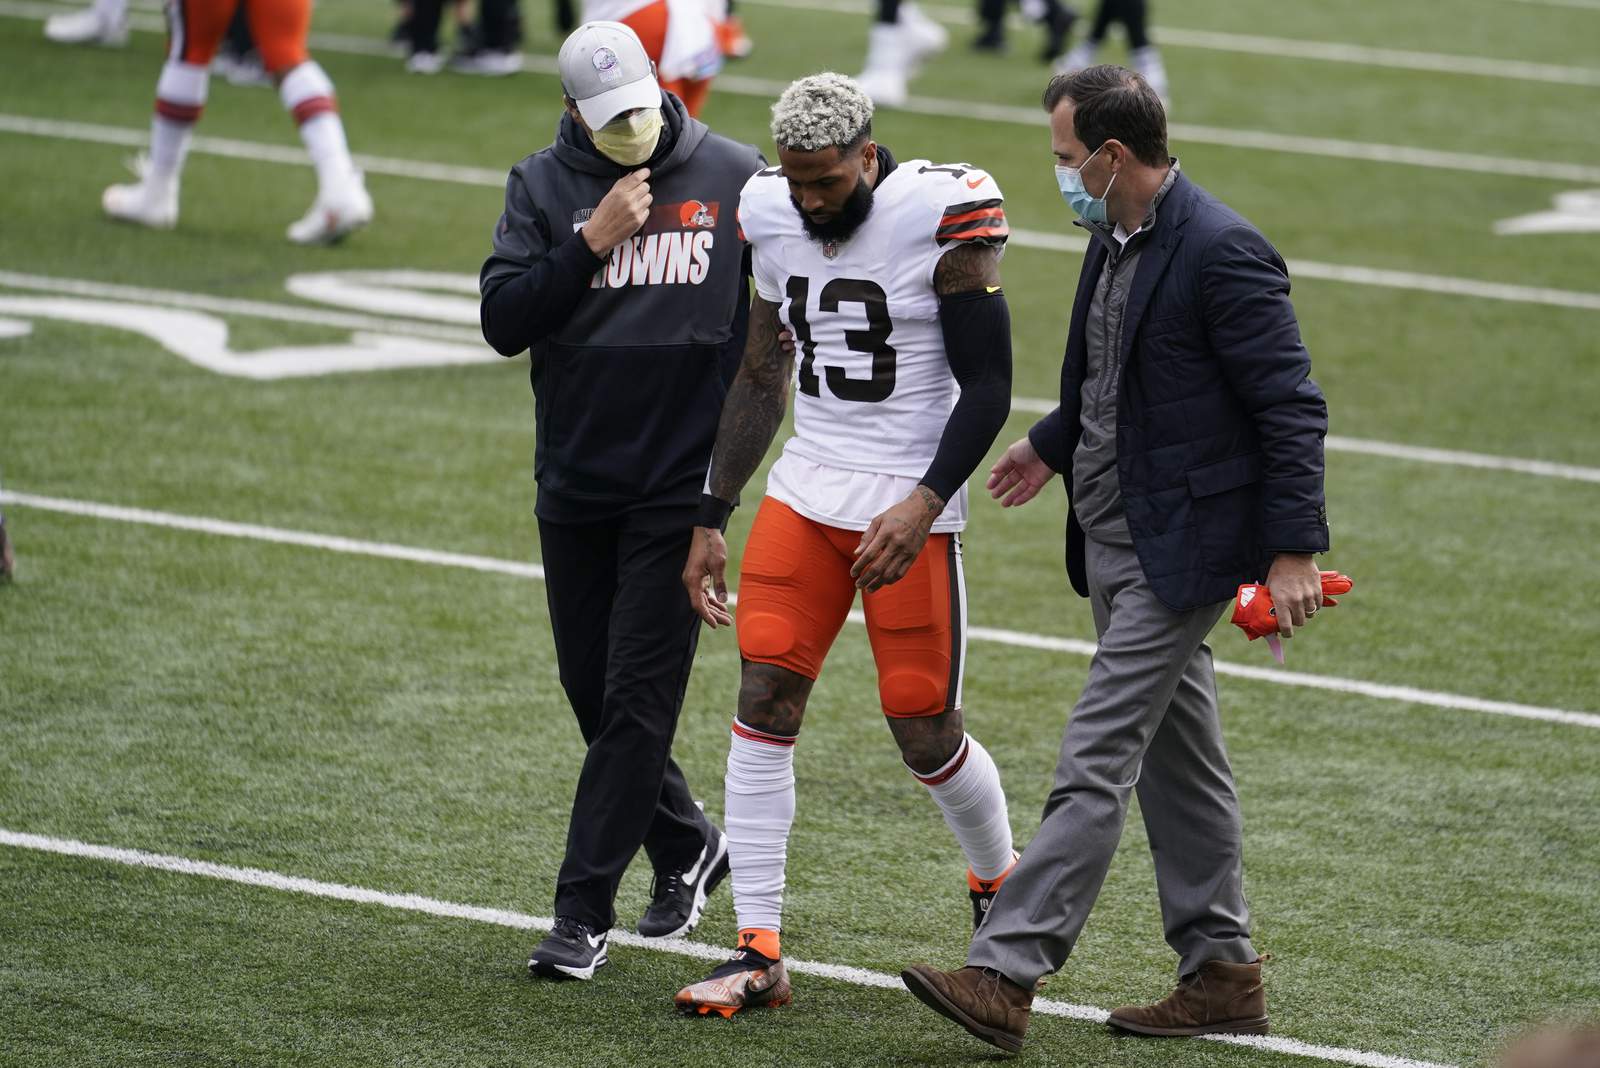 Browns star Beckham done for season with torn knee ligament